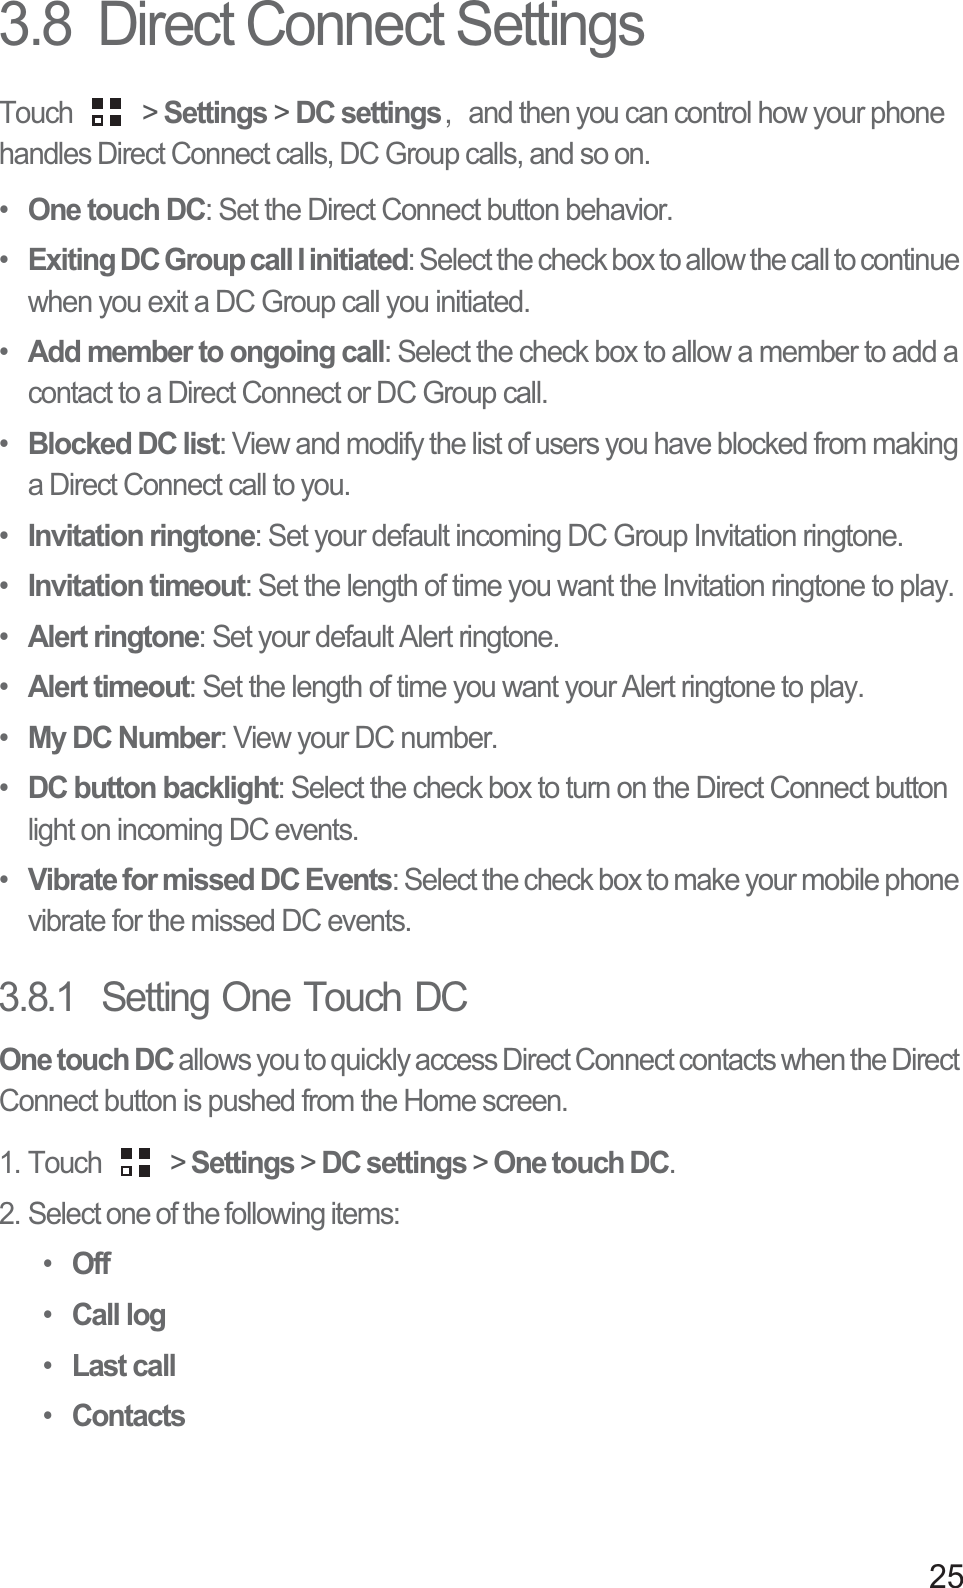 253.8  Direct Connect SettingsTouch   &gt; Settings &gt; DC settings᷍ and then you can control how your phone handles Direct Connect calls, DC Group calls, and so on.•One touch DC: Set the Direct Connect button behavior.•Exiting DC Group call I initiated: Select the check box to allow the call to continue when you exit a DC Group call you initiated.•Add member to ongoing call: Select the check box to allow a member to add a contact to a Direct Connect or DC Group call.•Blocked DC list: View and modify the list of users you have blocked from making a Direct Connect call to you.•Invitation ringtone: Set your default incoming DC Group Invitation ringtone.•Invitation timeout: Set the length of time you want the Invitation ringtone to play.•Alert ringtone: Set your default Alert ringtone.•Alert timeout: Set the length of time you want your Alert ringtone to play.•My DC Number: View your DC number.•DC button backlight: Select the check box to turn on the Direct Connect button light on incoming DC events.•Vibrate for missed DC Events: Select the check box to make your mobile phone vibrate for the missed DC events.3.8.1  Setting One Touch DCOne touch DC allows you to quickly access Direct Connect contacts when the Direct Connect button is pushed from the Home screen.1. Touch   &gt; Settings &gt; DC settings &gt; One touch DC.2. Select one of the following items:•Off•Call log•Last call•Contacts